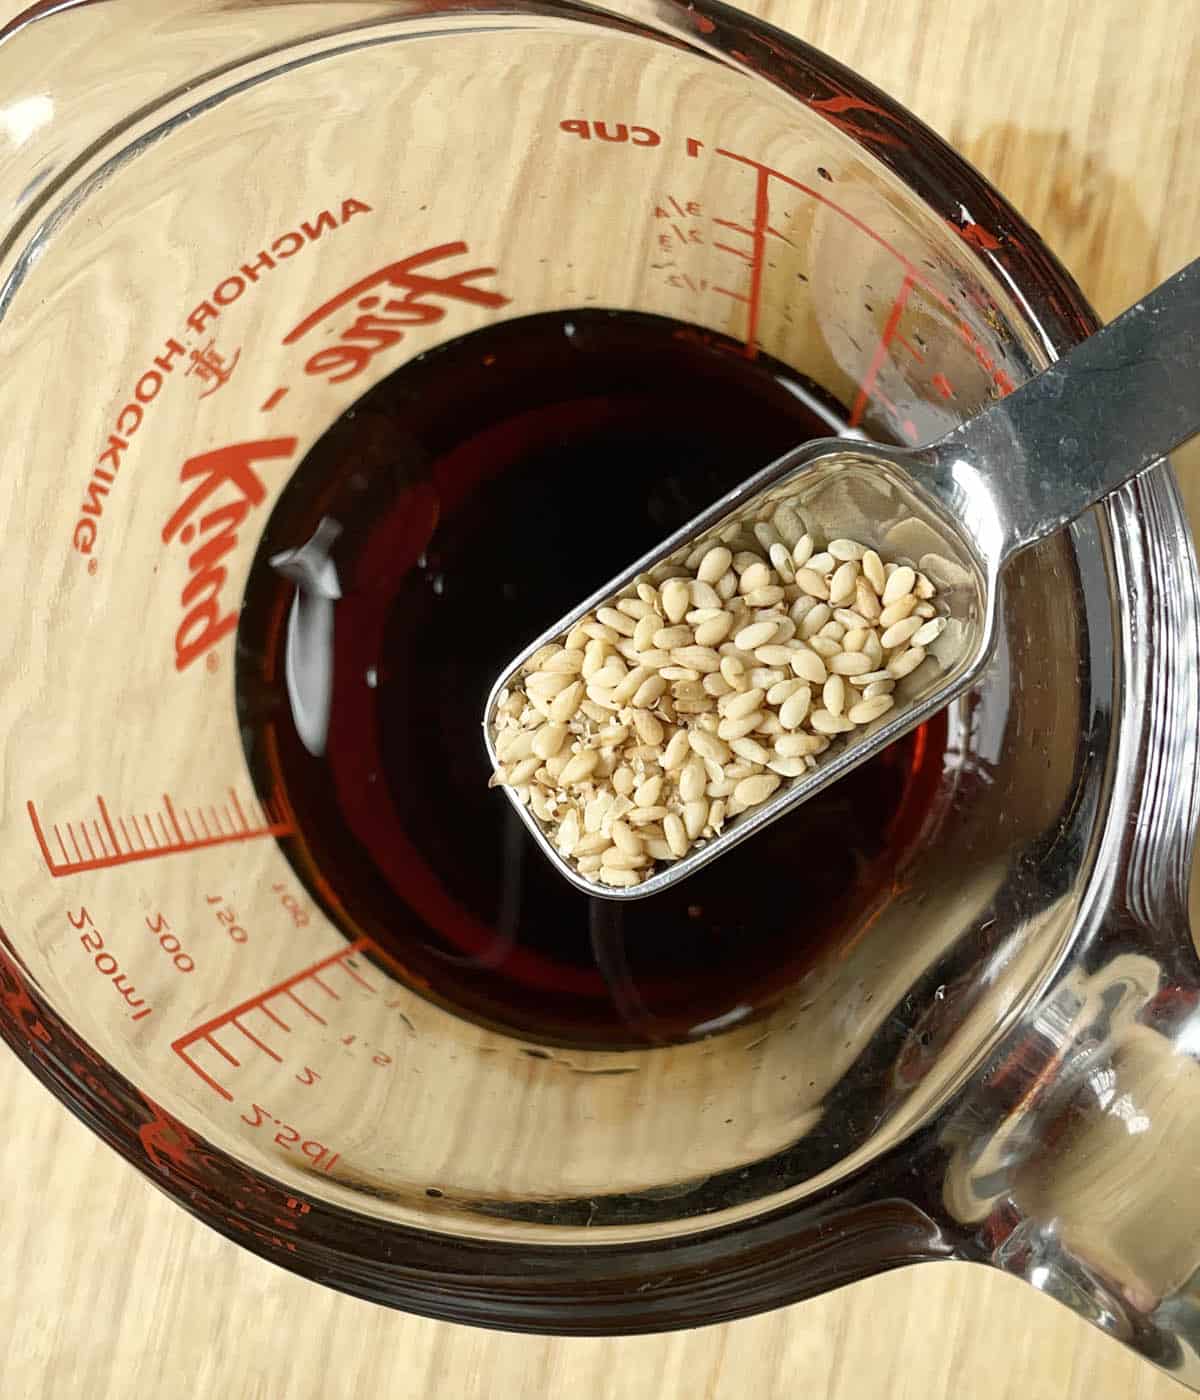 A metal spoon containing sesame seeds over a glass measuring cup containing brown liquid.